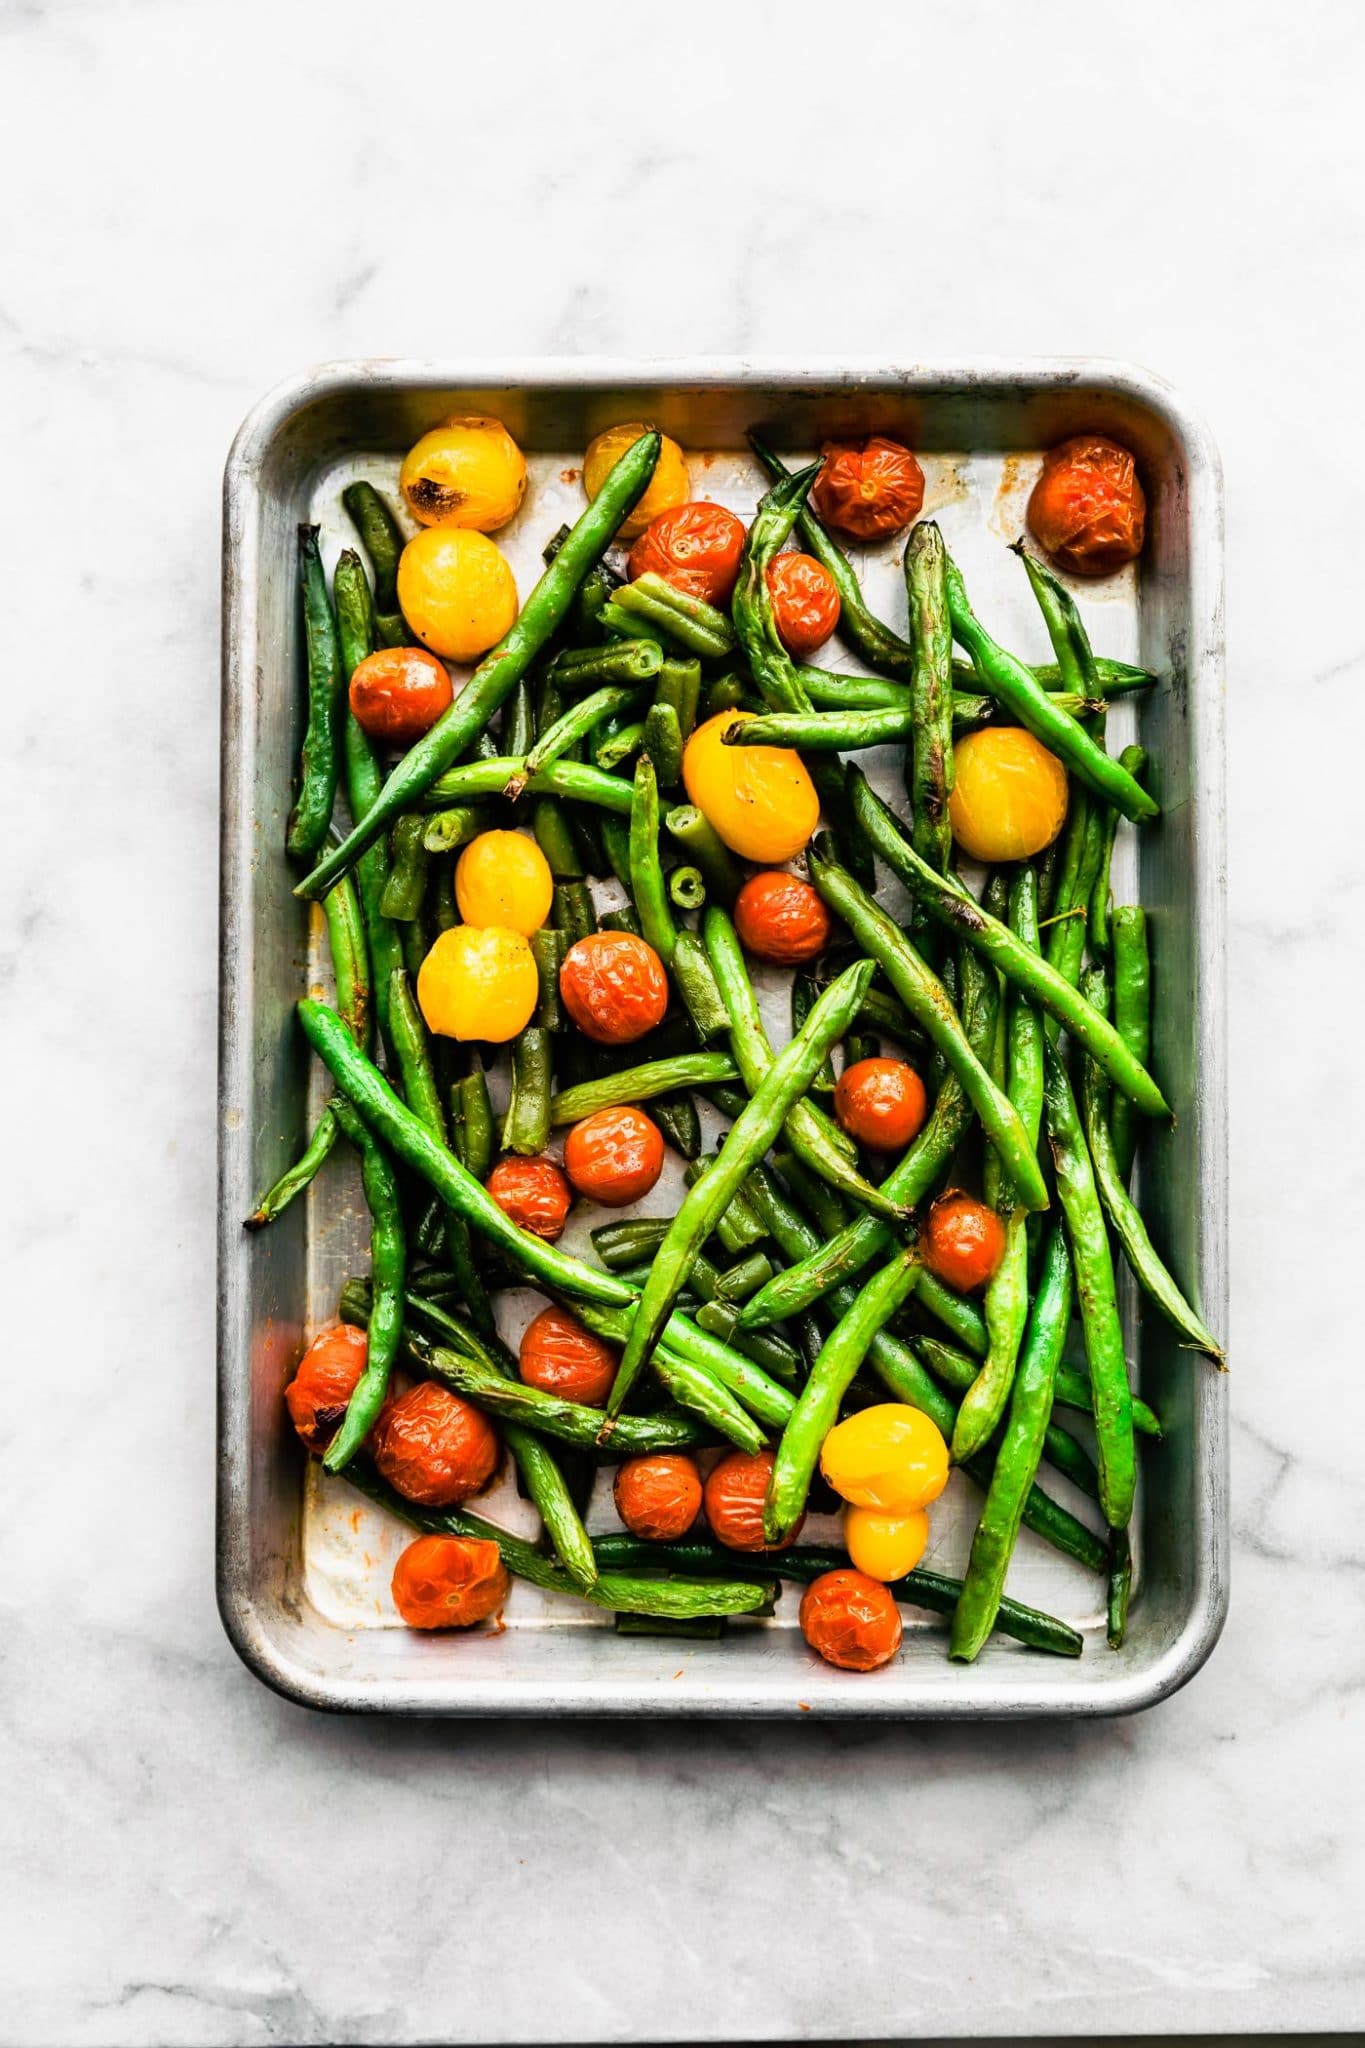 blistered cherry tomatoes and green beans in a bakin gpan